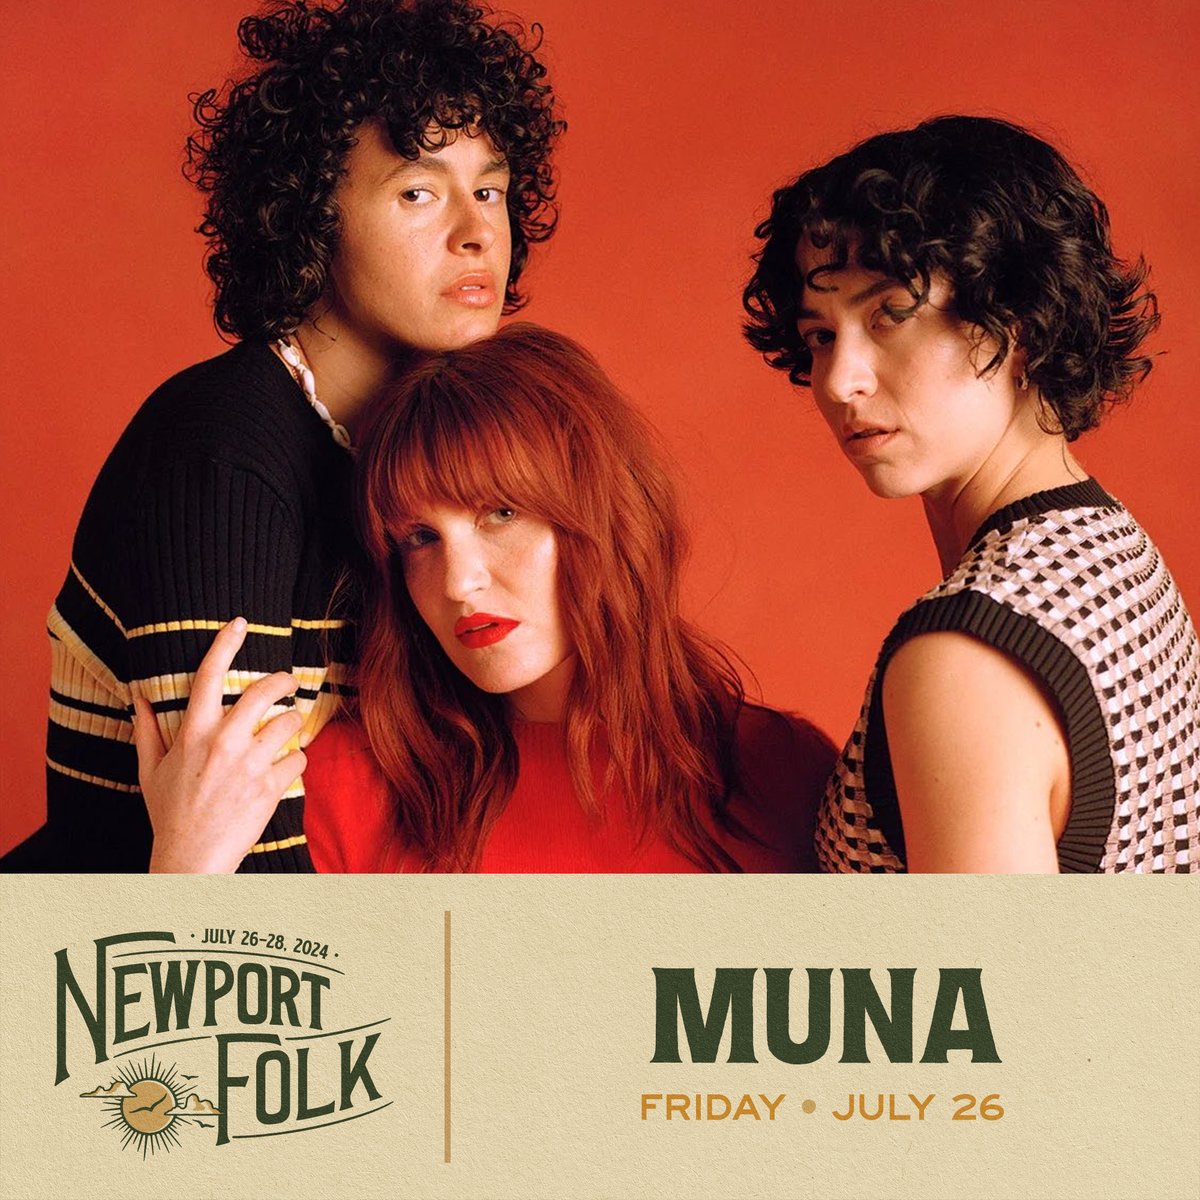 Life’s so fun! Life’s so fun! ✨ @whereisMUNA is joining our Friday lineup this summer. For their Artist Give, the band asked @newportfestsorg to provide a grant to Silverlake Conservatory of Music, a nonprofit music school in Los Angeles.